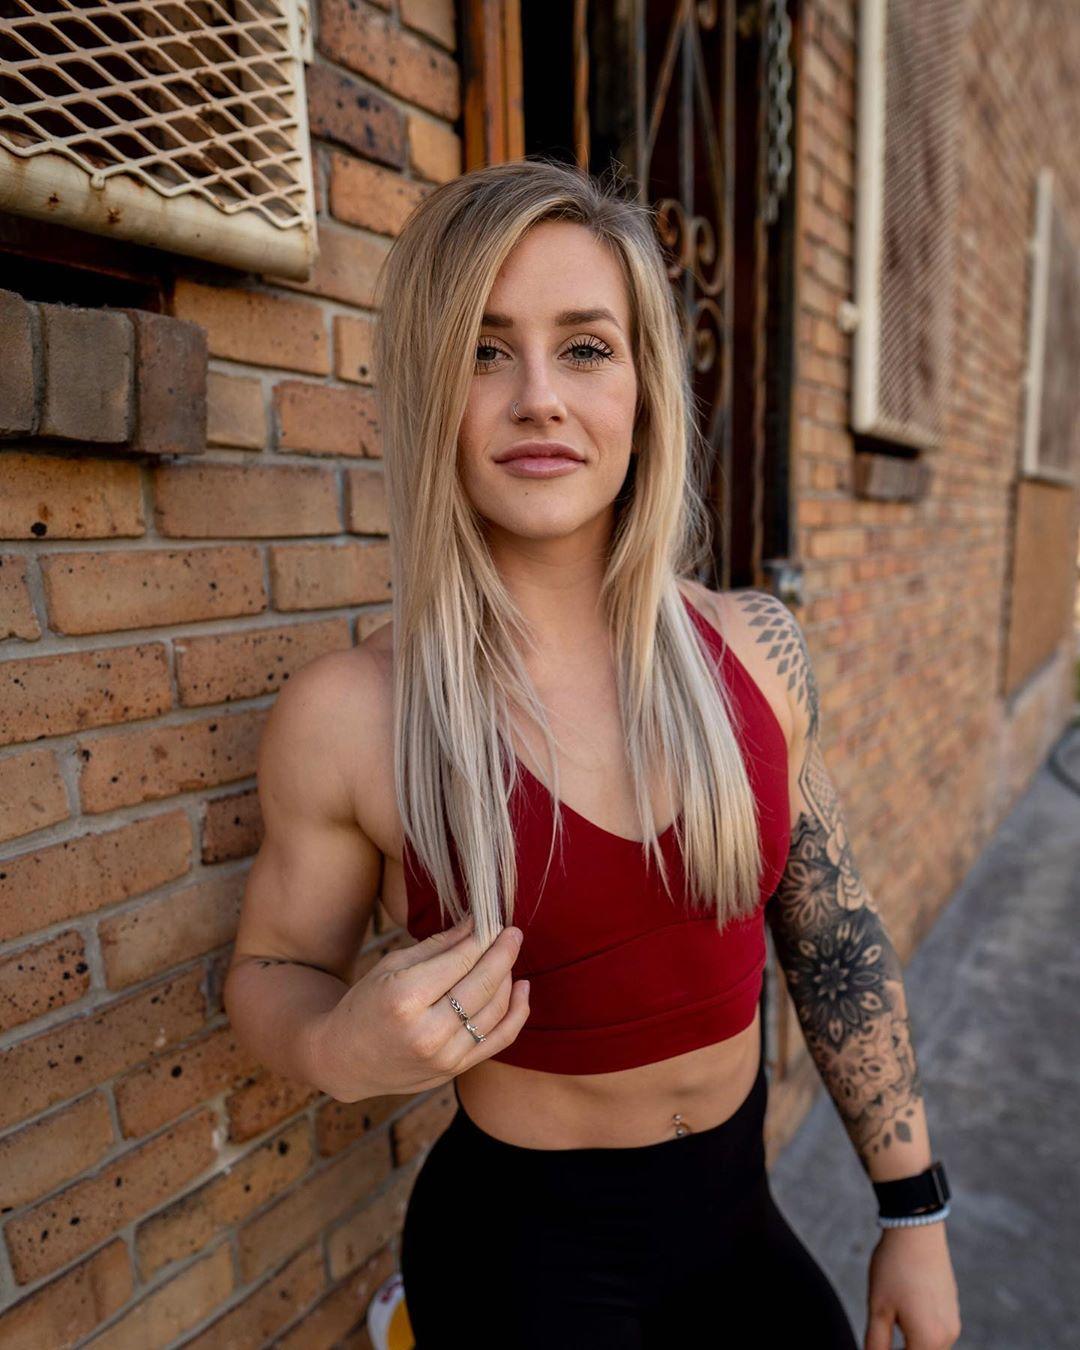 51 Hot Pictures Of Josie Hamming That Will Fill Your Heart With Joy A Success 15